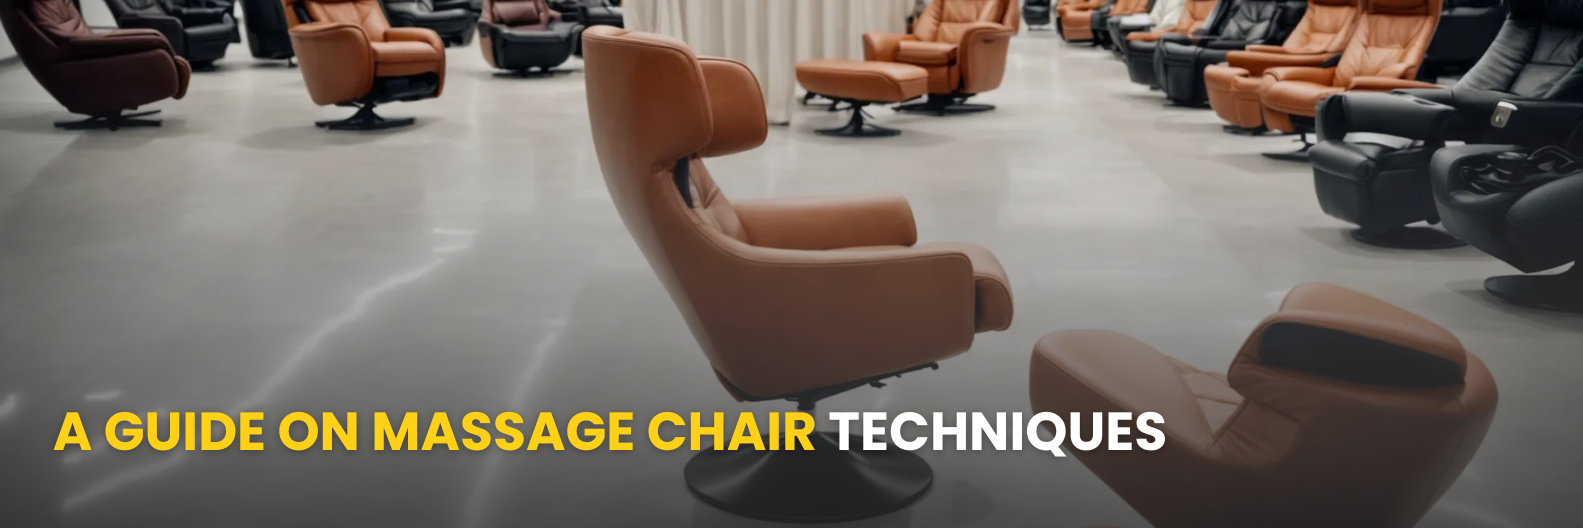 Ultimate guide to choosing the perfect massage chair, featuring detailed tips and expert advice for finding the ideal chair for unparalleled relaxation.